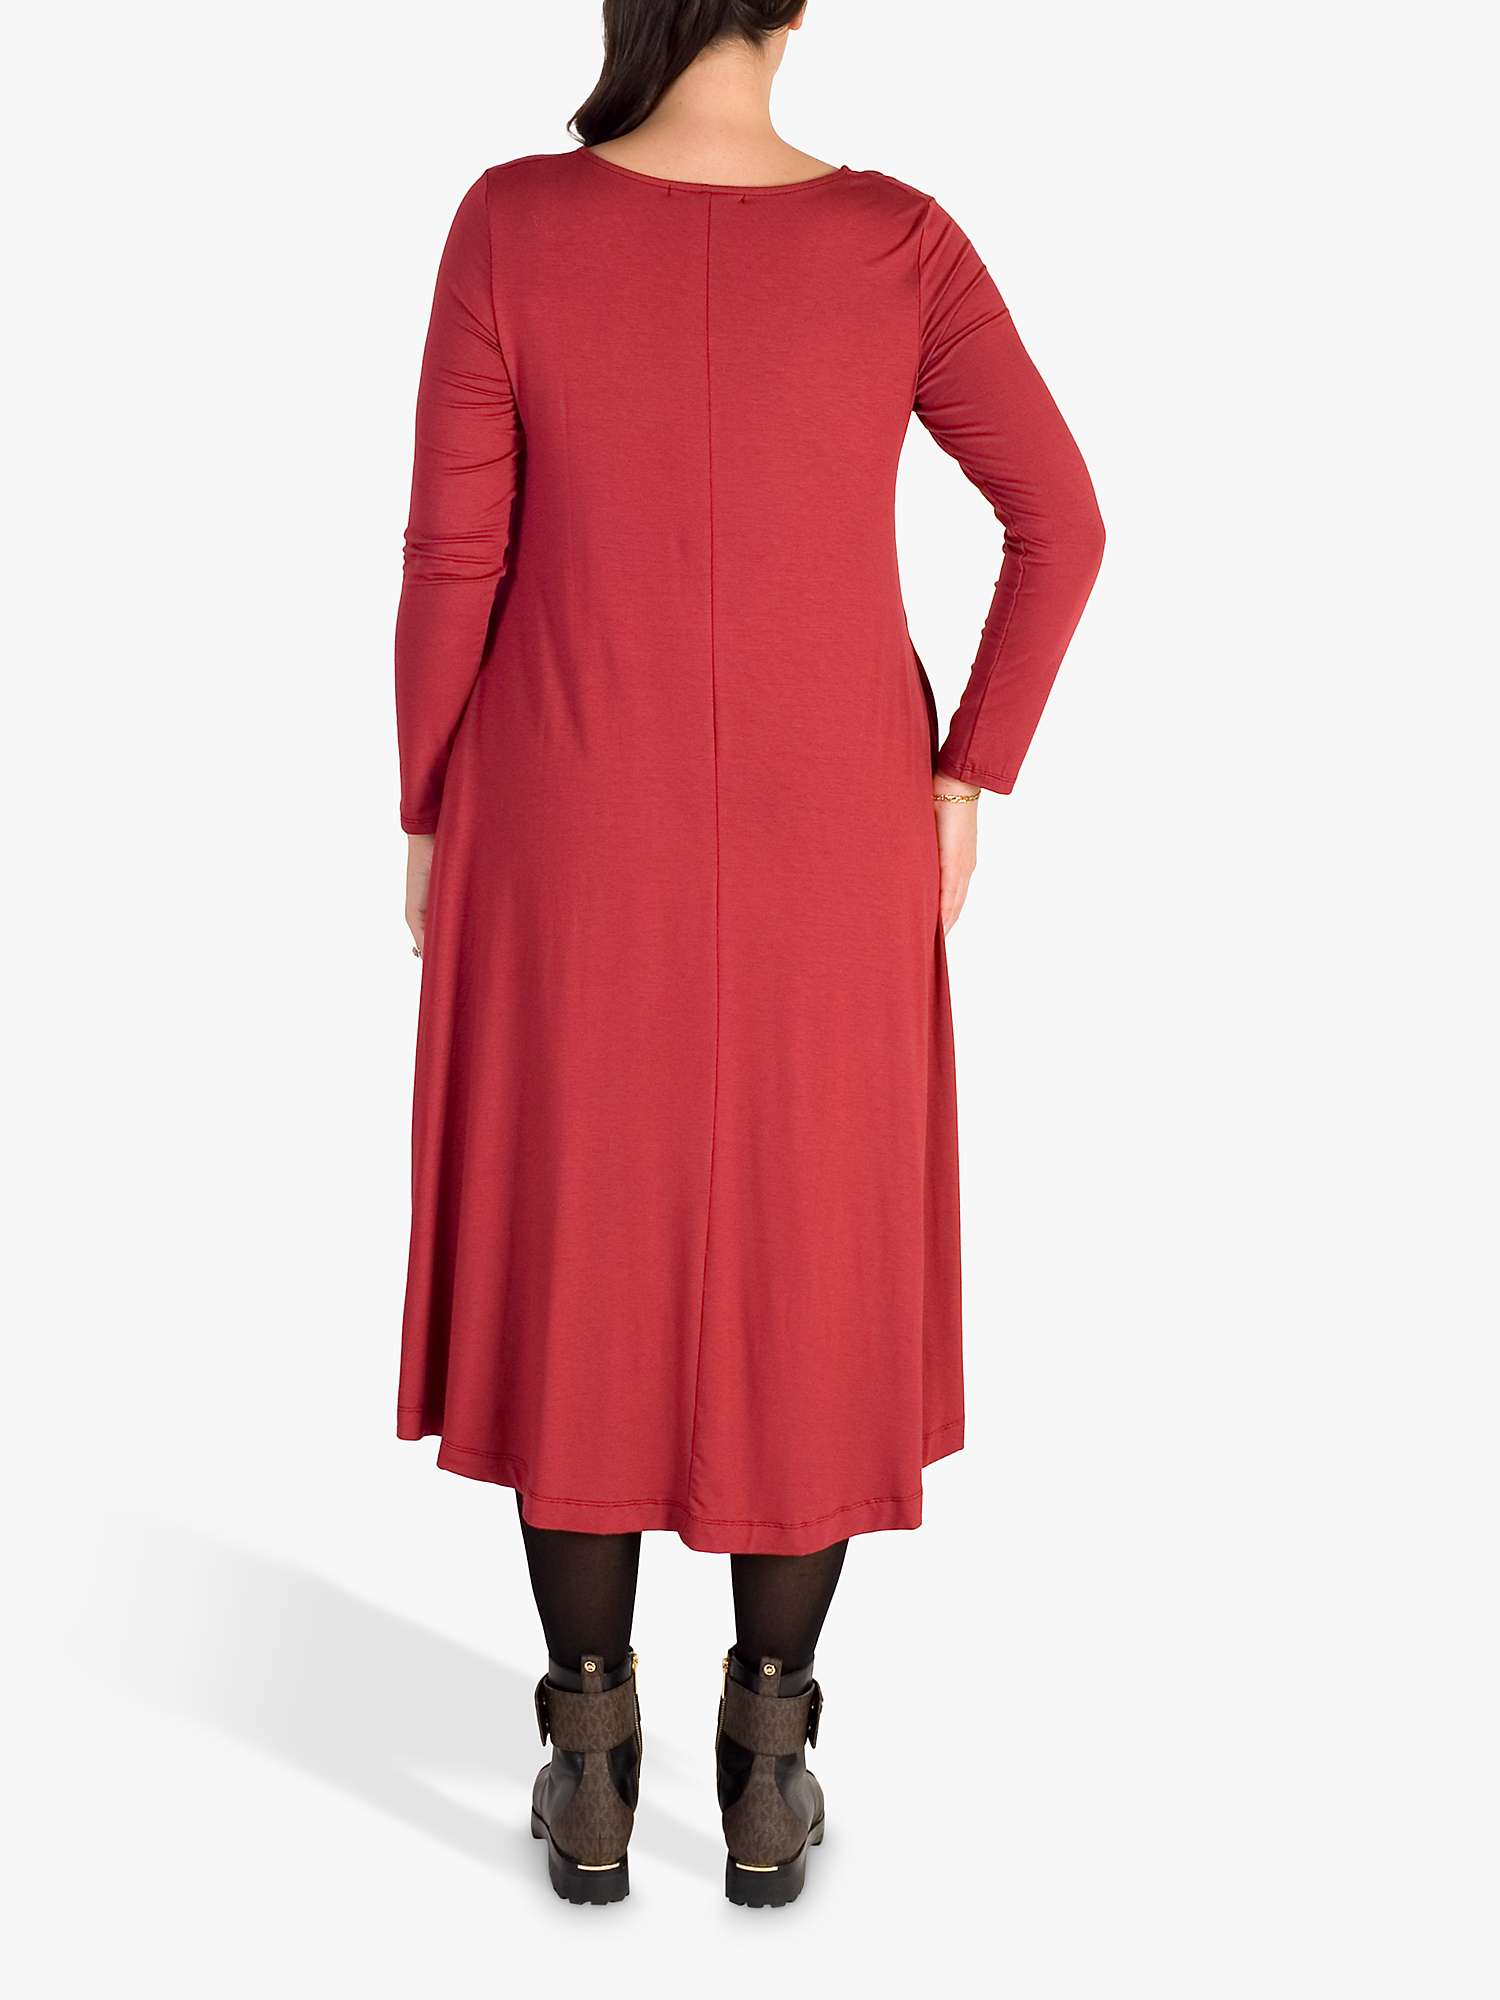 Buy chesca Ruched Hem Midi Dress, Red Online at johnlewis.com